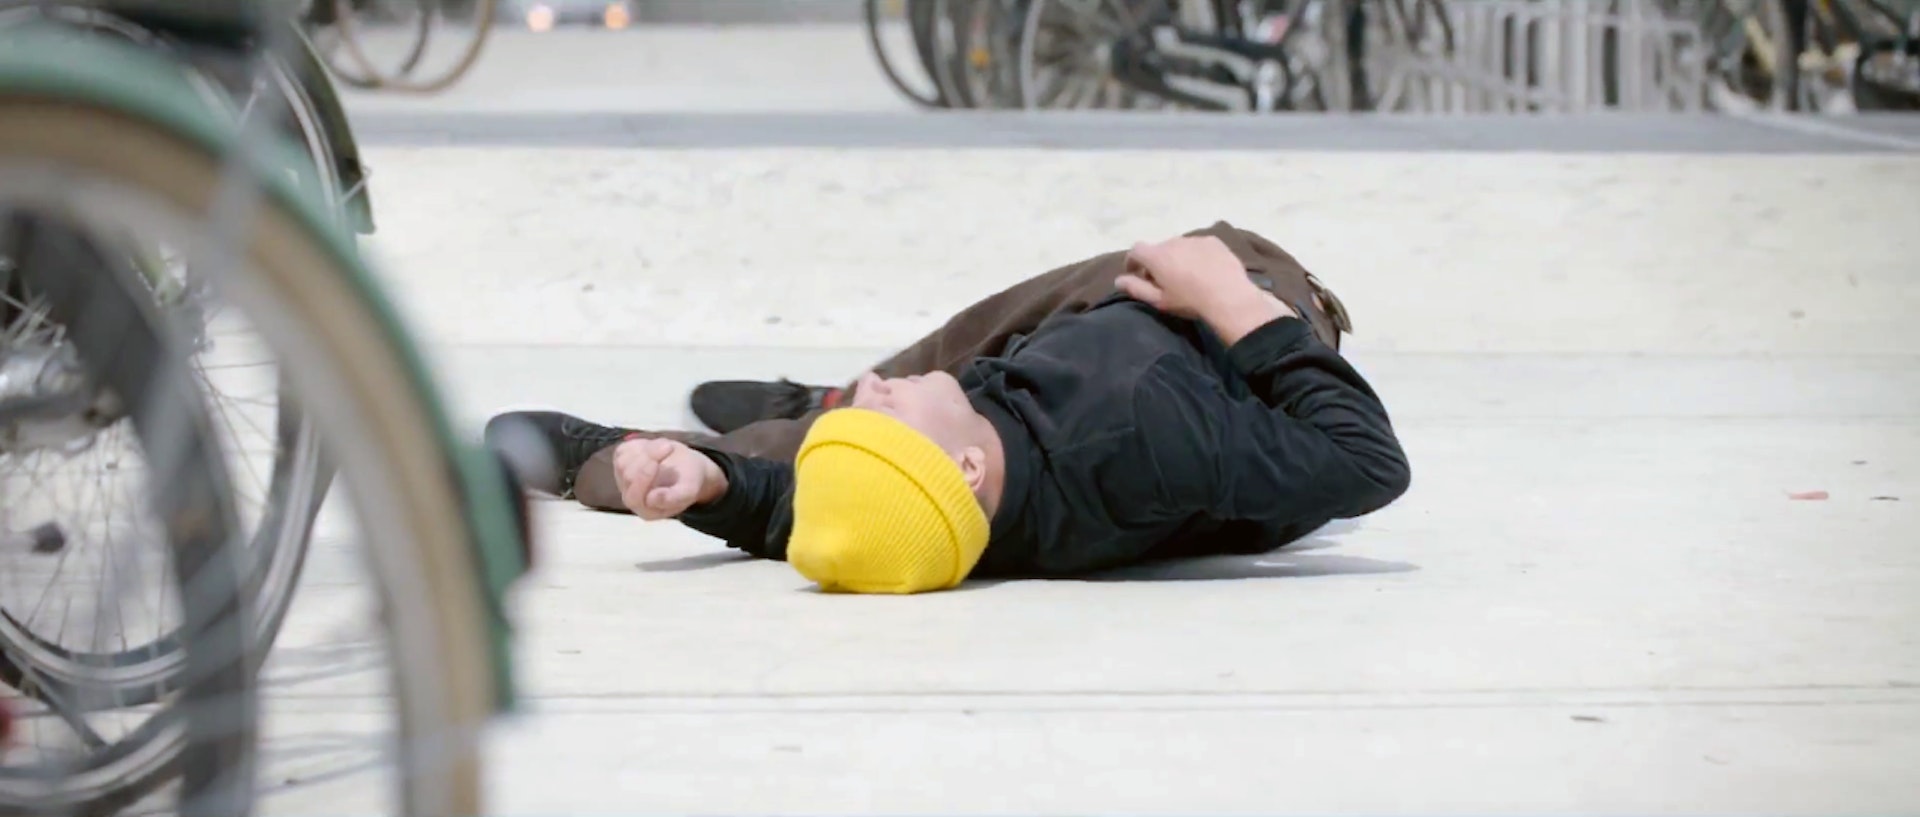 Fall over, get up, try again. A short film about resilience with Nike SB skater Casper Brooker